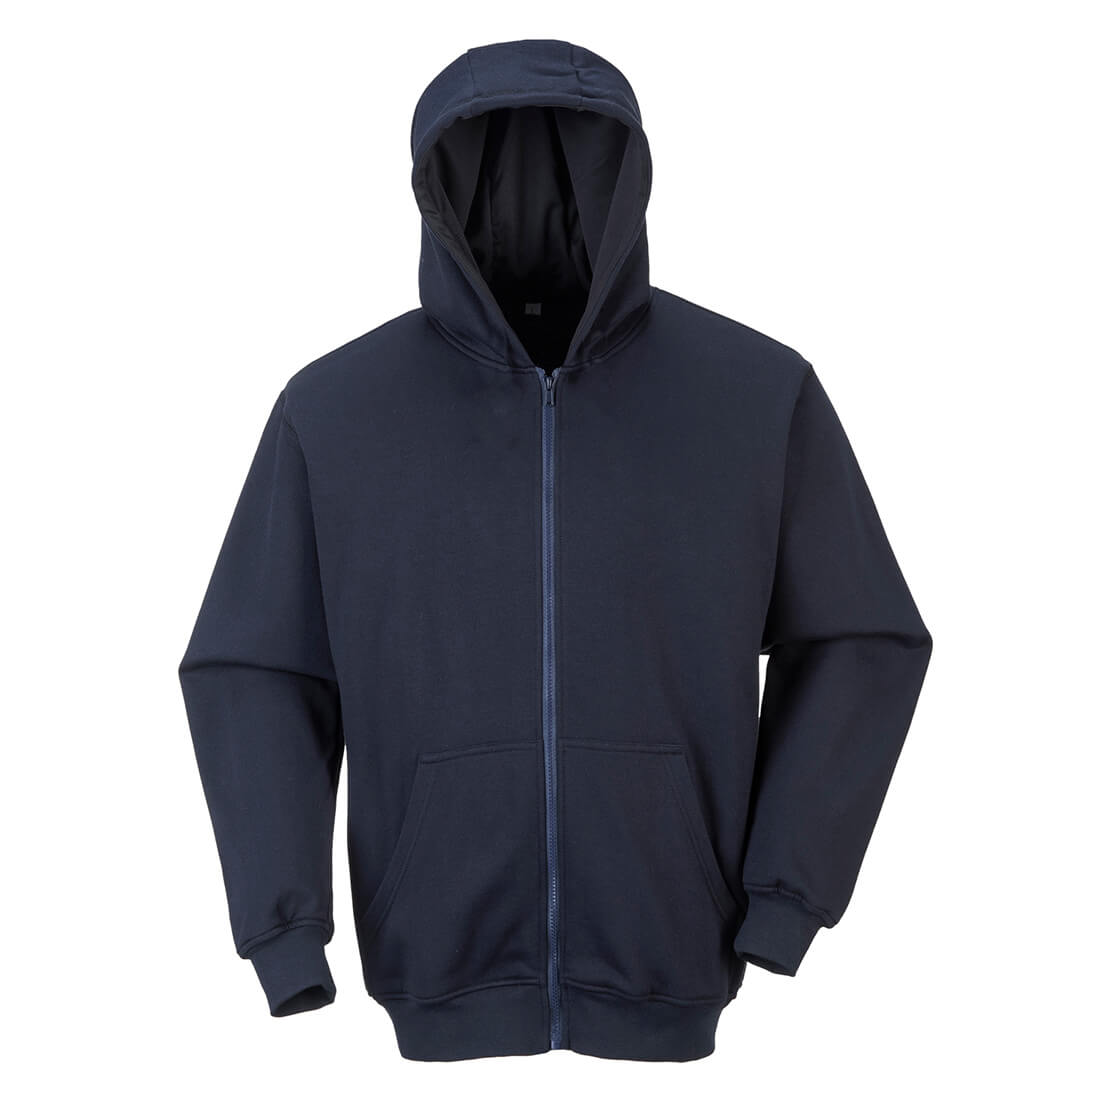 Image of Modaflame Mens Anti Static Flame Resistant Hoodie Navy XL